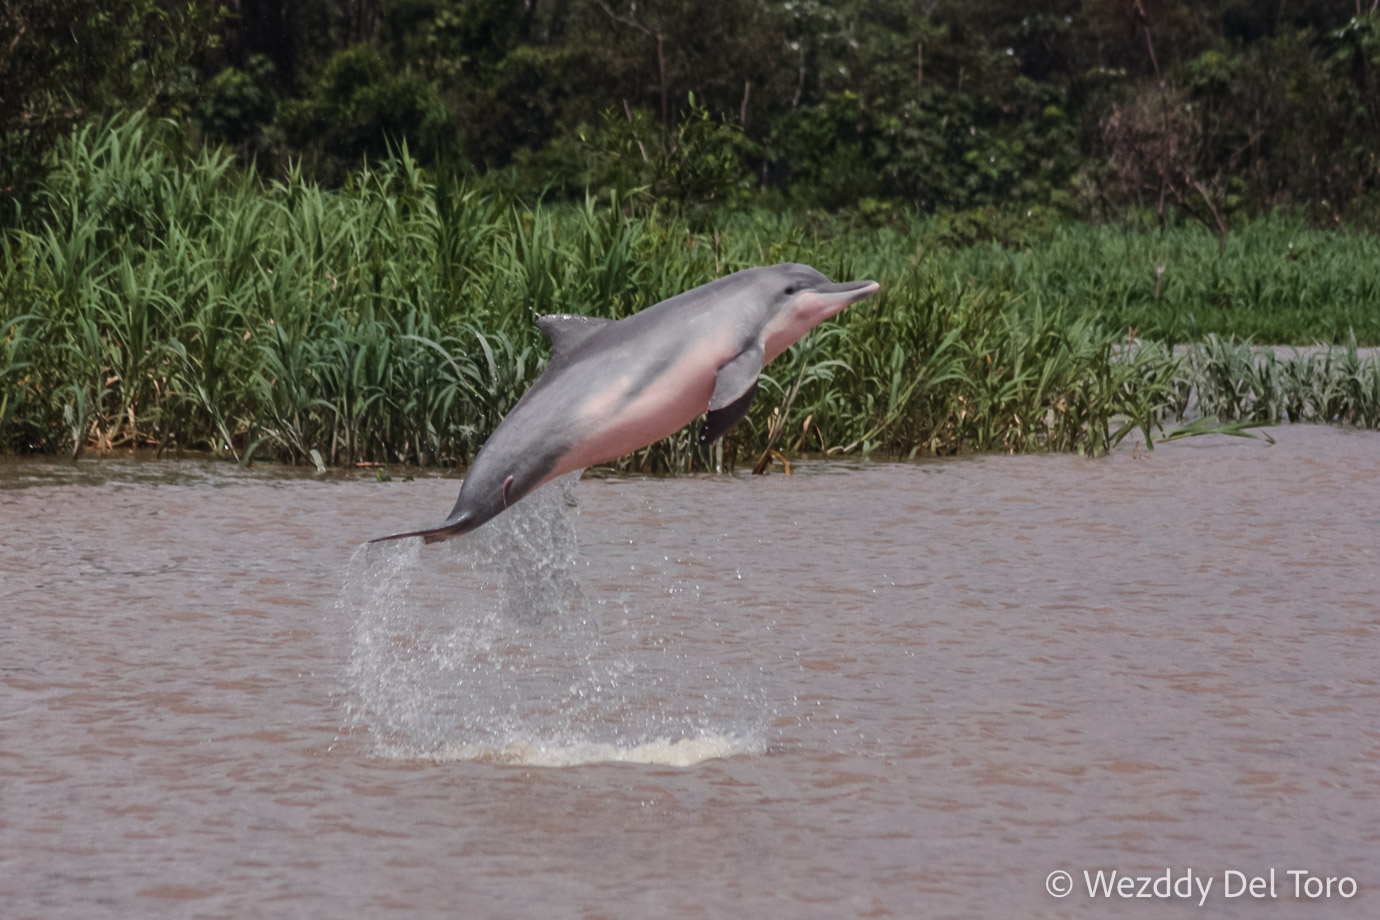 A grey river dolphin (“Tucuxi”, Sotalia fluviatilis-Cetacea: Delphinidae) with a parasitic freshwater canero catfish (“Candiru”, Siluriformes: Trichomycteridae) attached to its body in between the fluke and the abdomen. The “Tucuxi” is the only member of the Delphinidae family living in freshwater habitats in the Amazon River Basin.